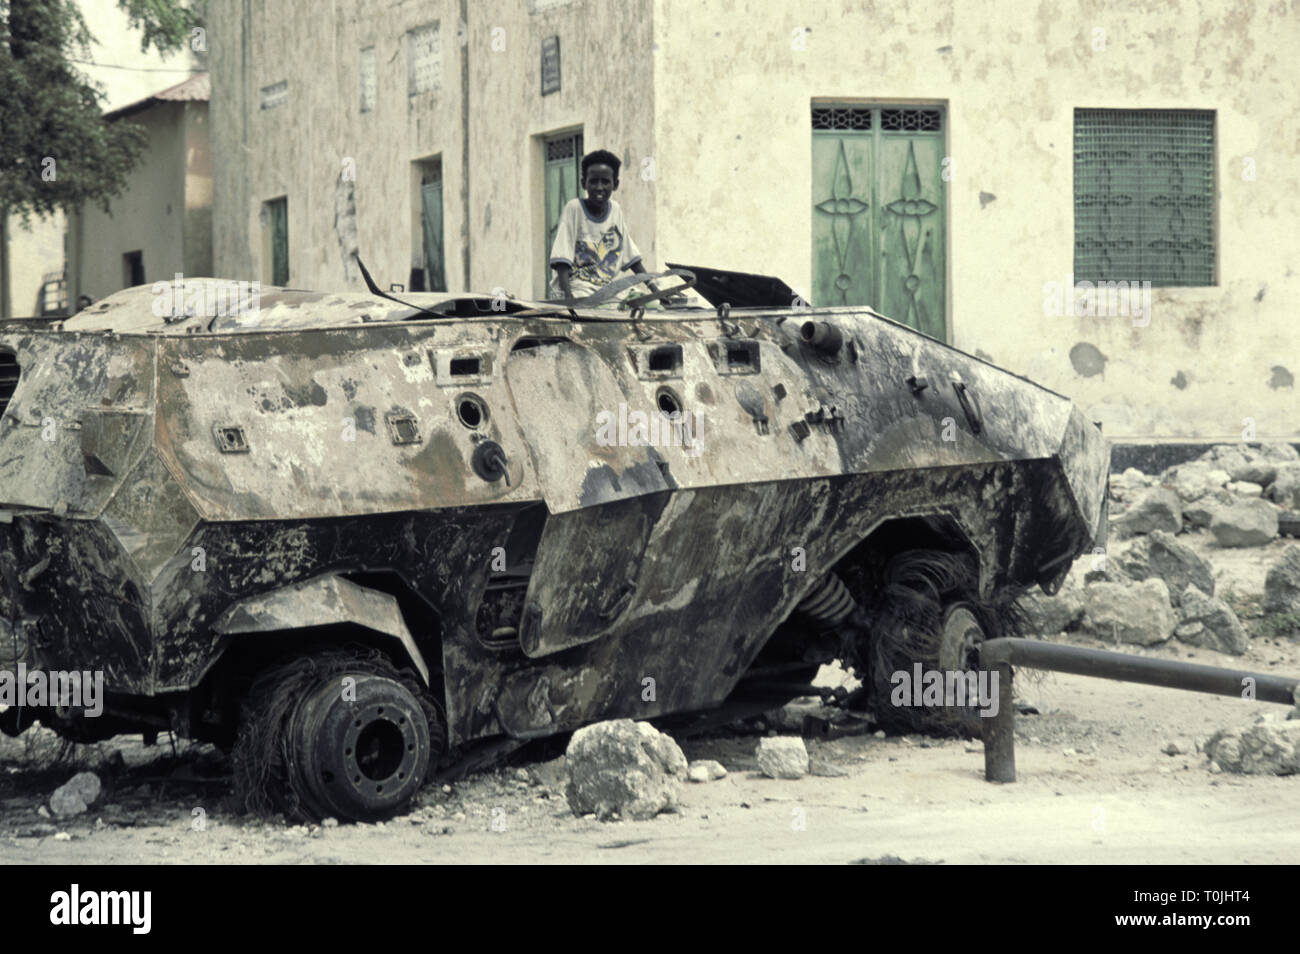 25th October 1993 A young boy plays on top of a burnt-out Malaysian Condor APC that was attacked by Somalis on the 3rd of October as it was trying to rescue 70 US Rangers during the 'Black Hawk down' incident in the Bakara Market area of Mogadishu, Somalia. Stock Photo